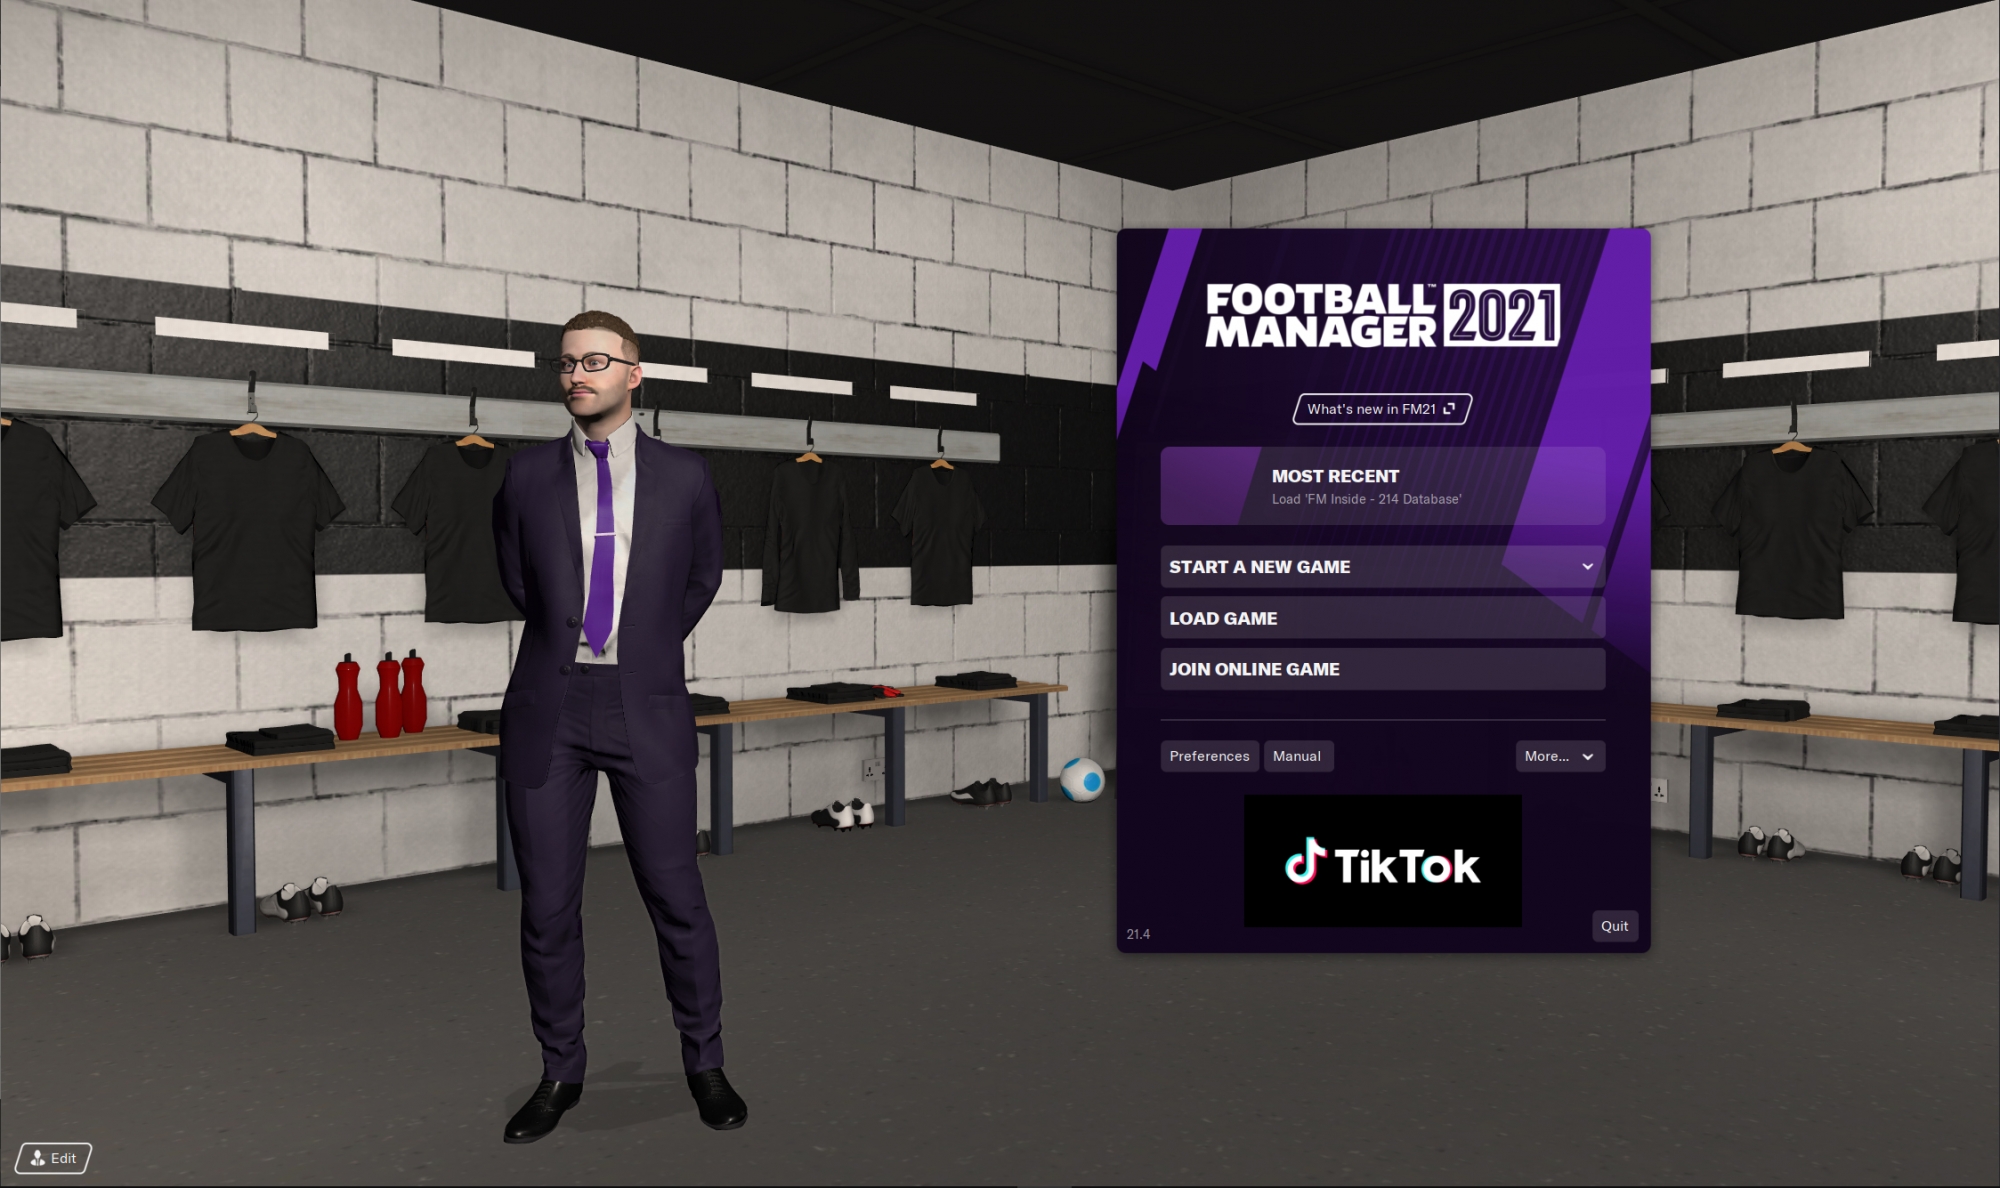 Home screen in Football Manager 2021